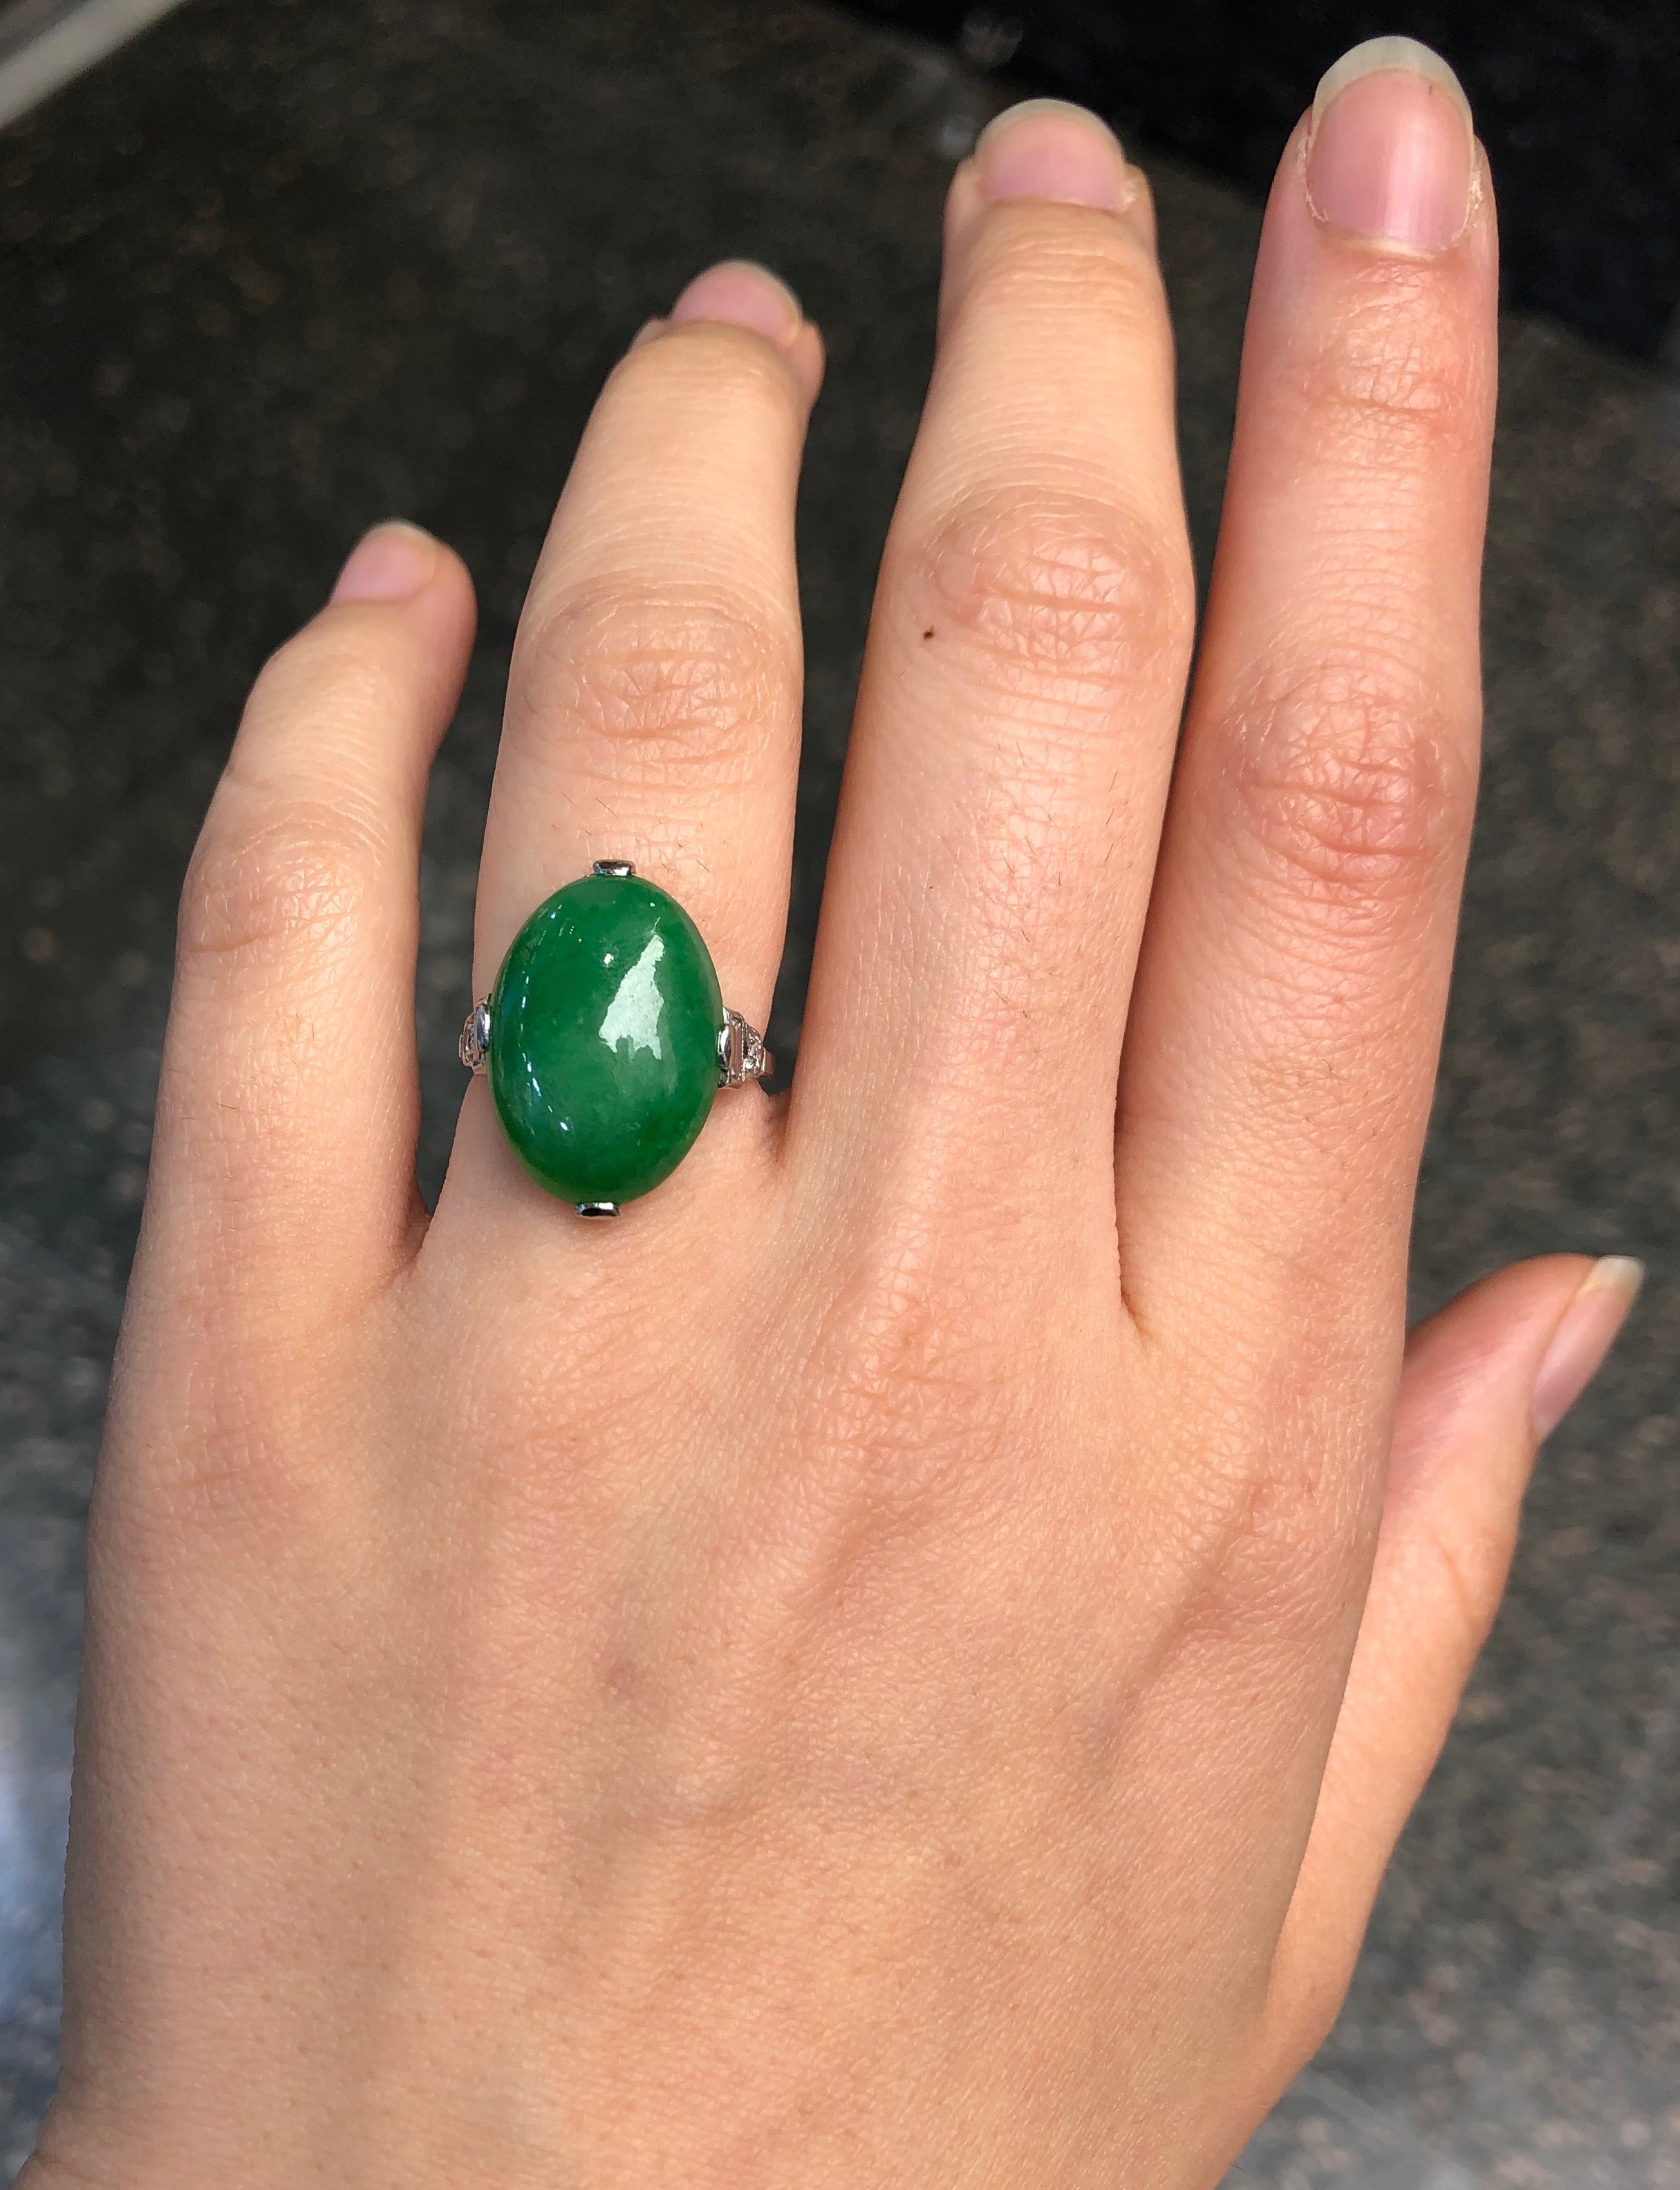 14k White Gold Men's Ring with Gibeon Meteorite and Jade Wood Inlays C |  Revolution Jewelry